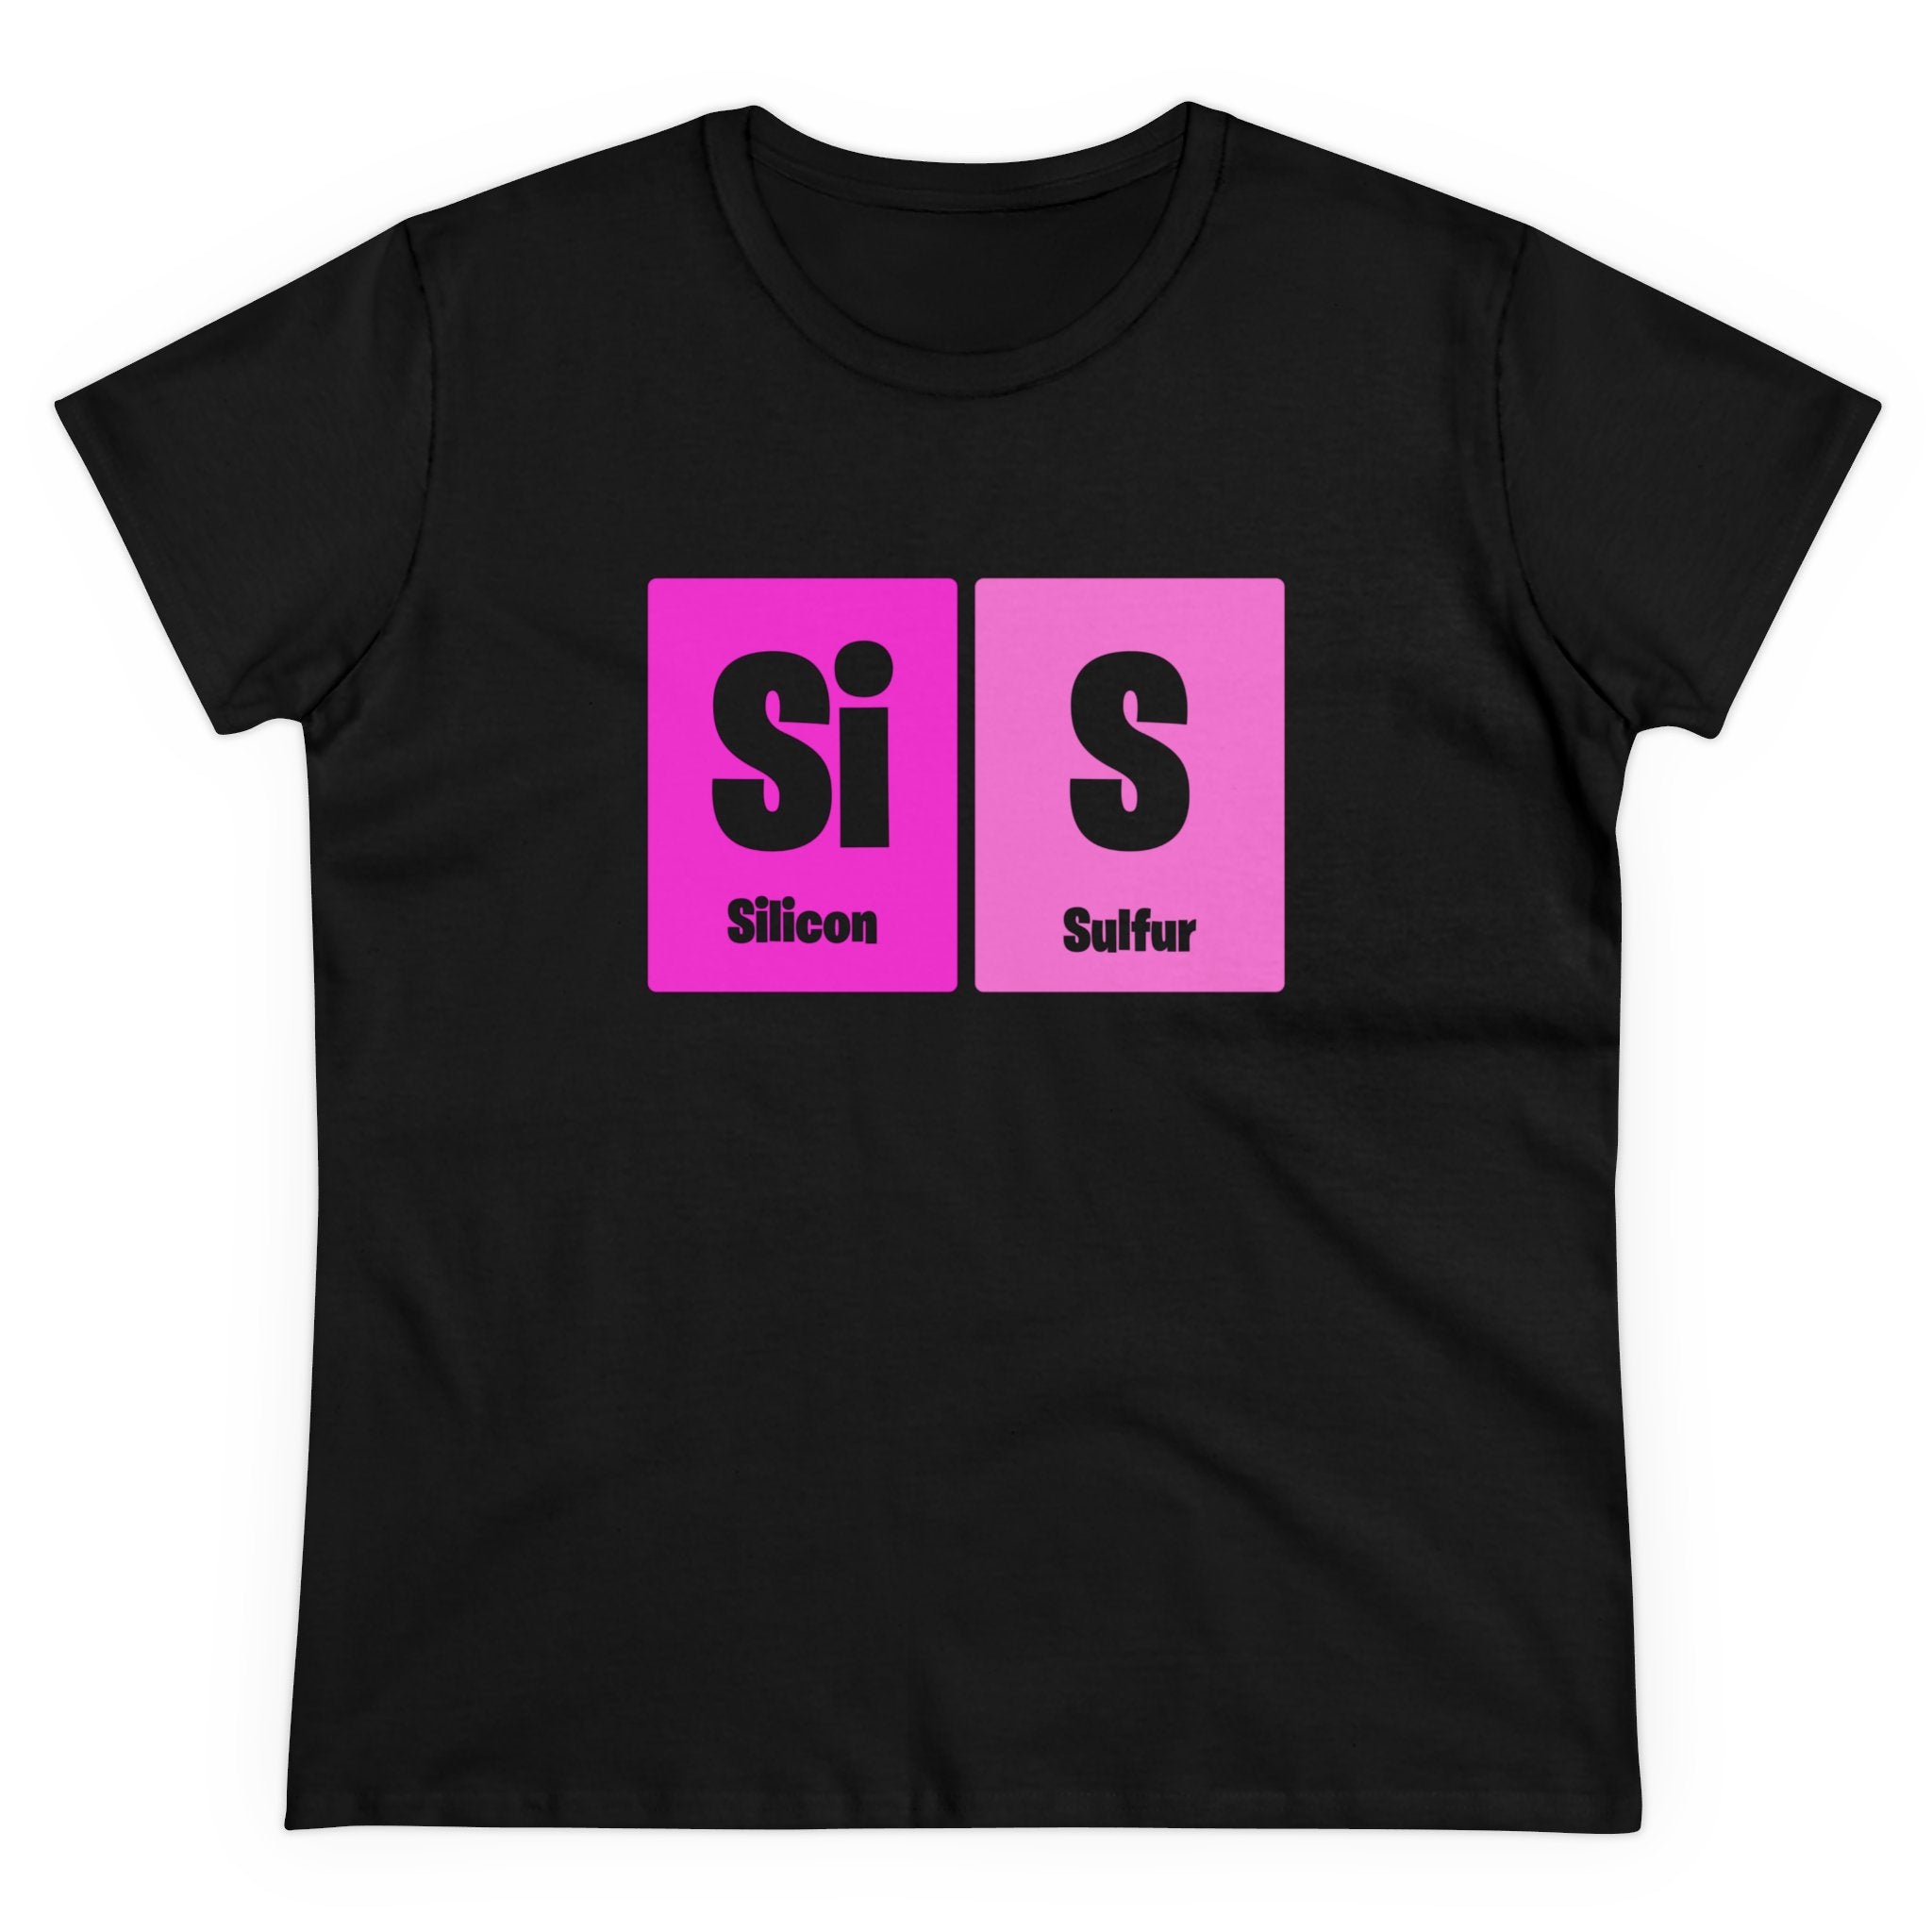 Si-S Light Pendant - Women's Tee featuring the periodic table elements Silicon (Si) and Sulfur (S) in pink boxes with labels, inspired by the chic Si-S Light Pendant.